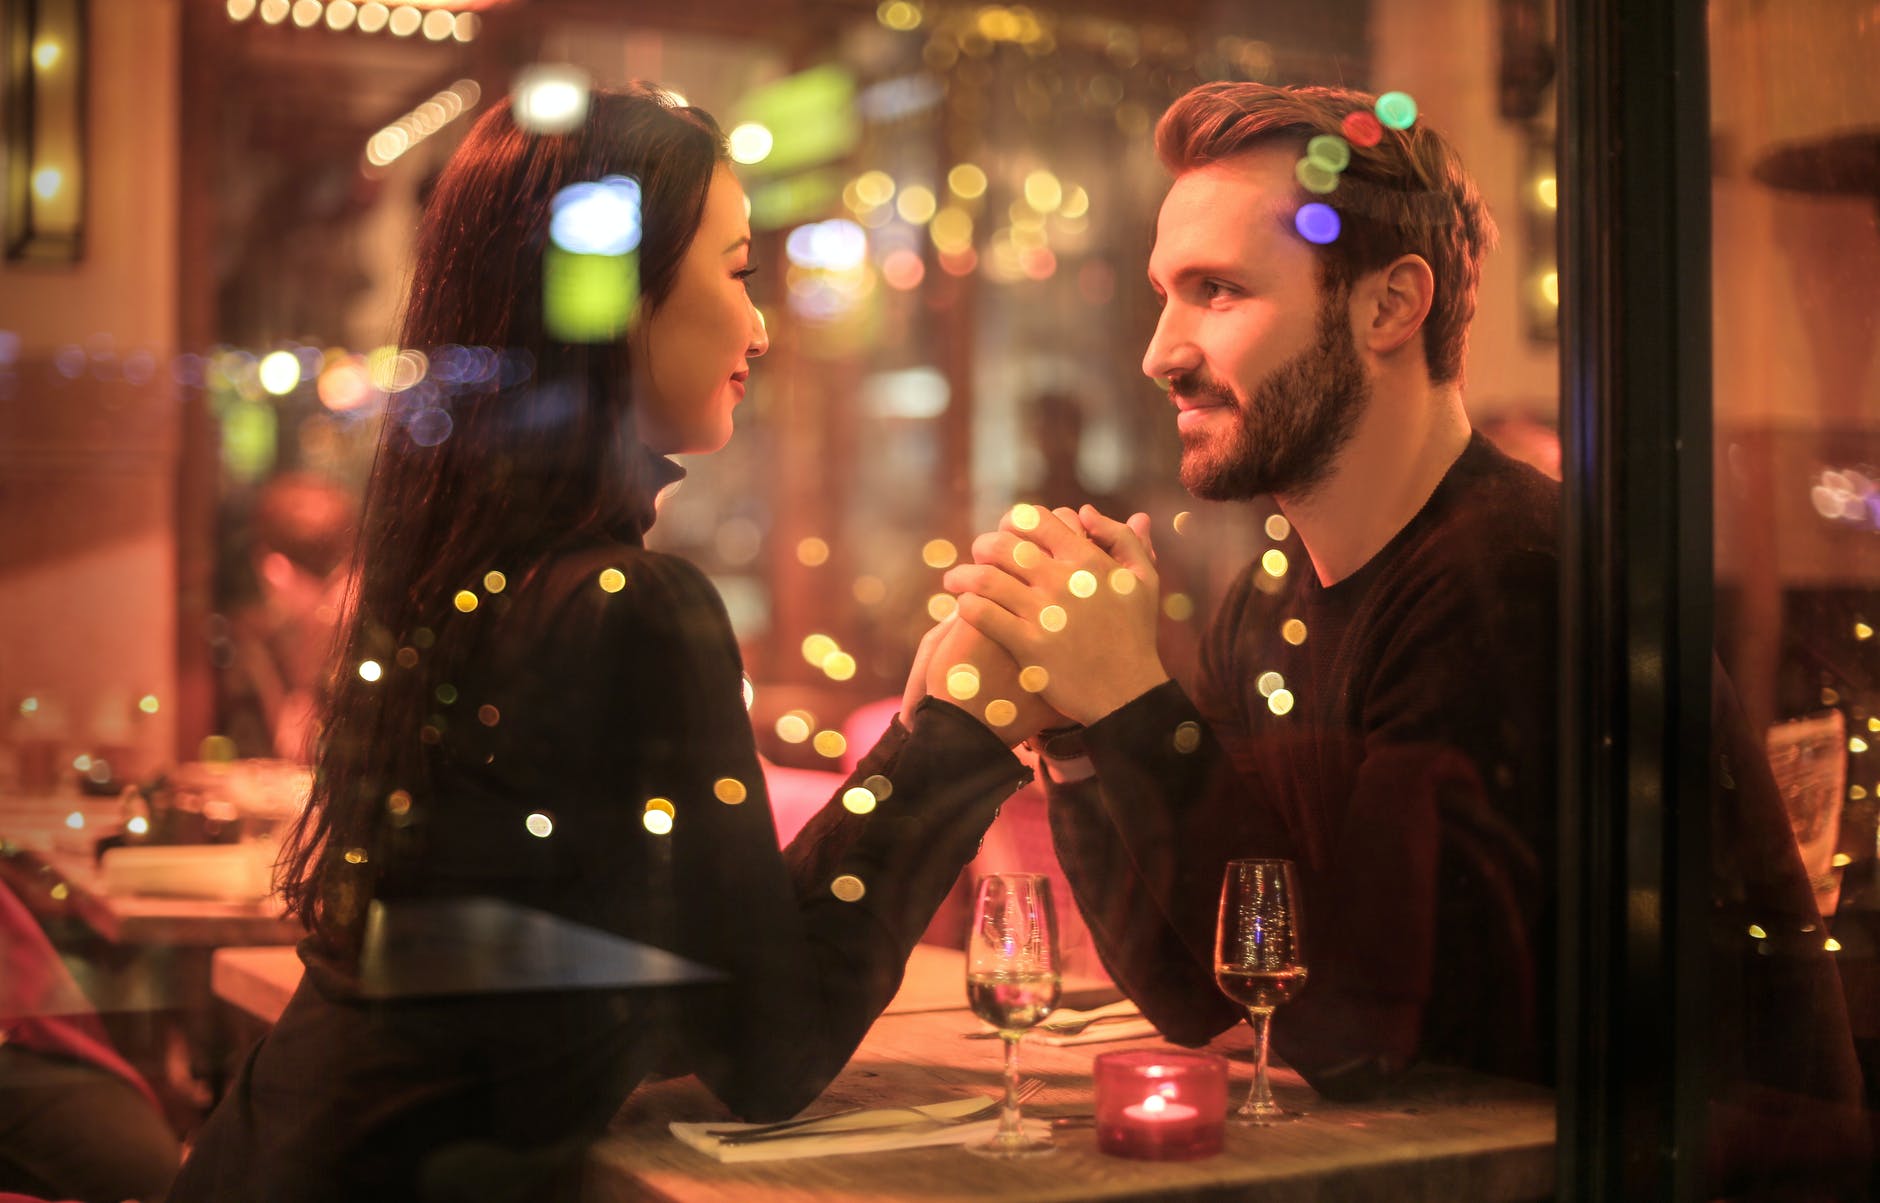 20 Dating Tips For People in Their 30s